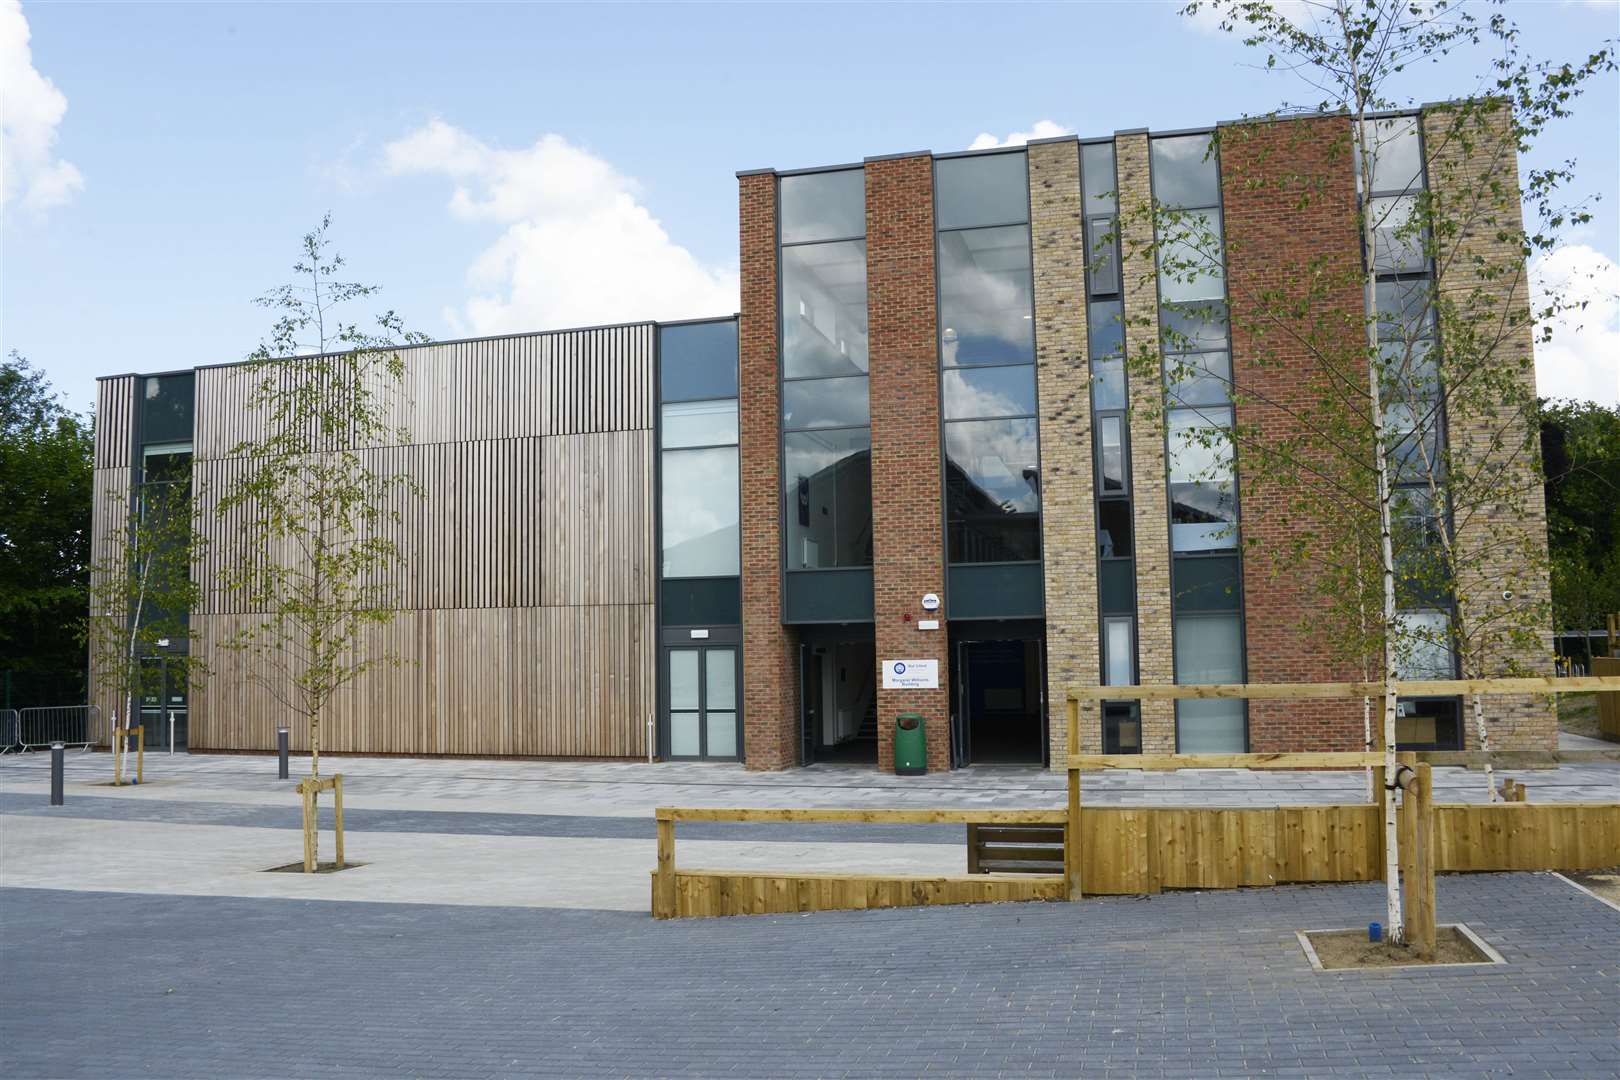 The Wye Free School opened in 2013, with a new building unveiled in July this year.